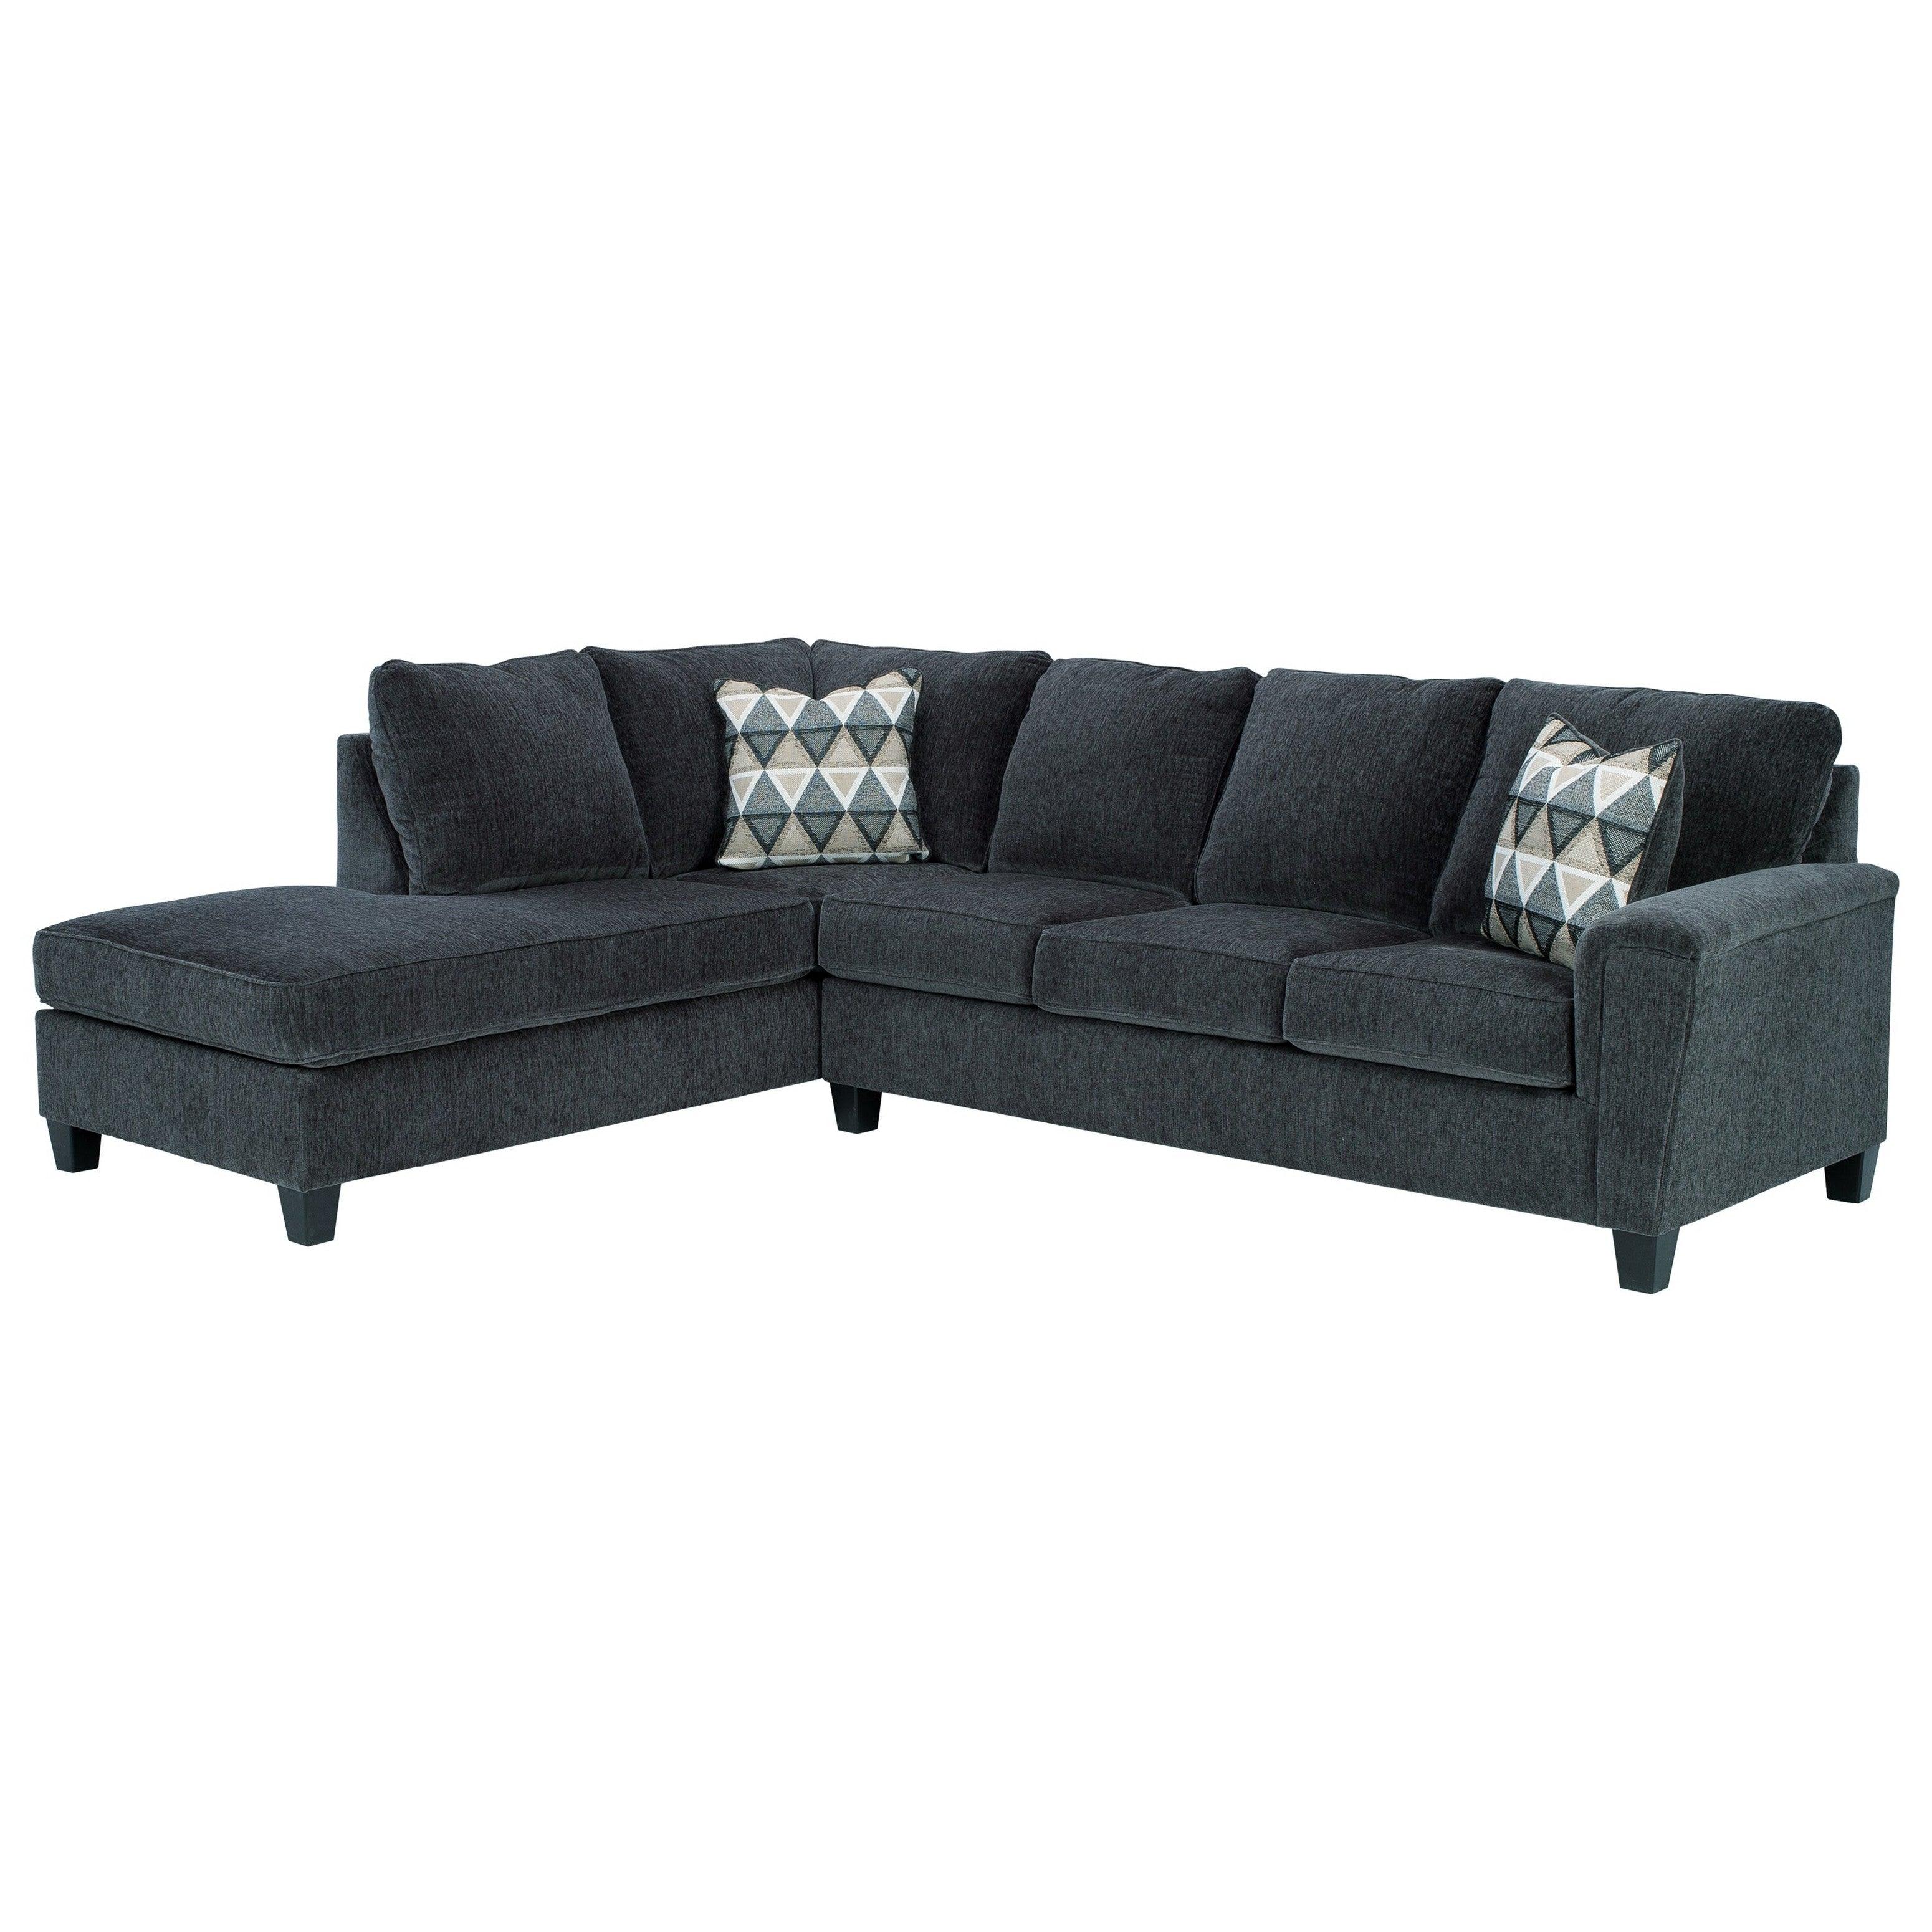 Abinger 2-Piece Sectional with Chaise - Ash-83905S1 - Underkut